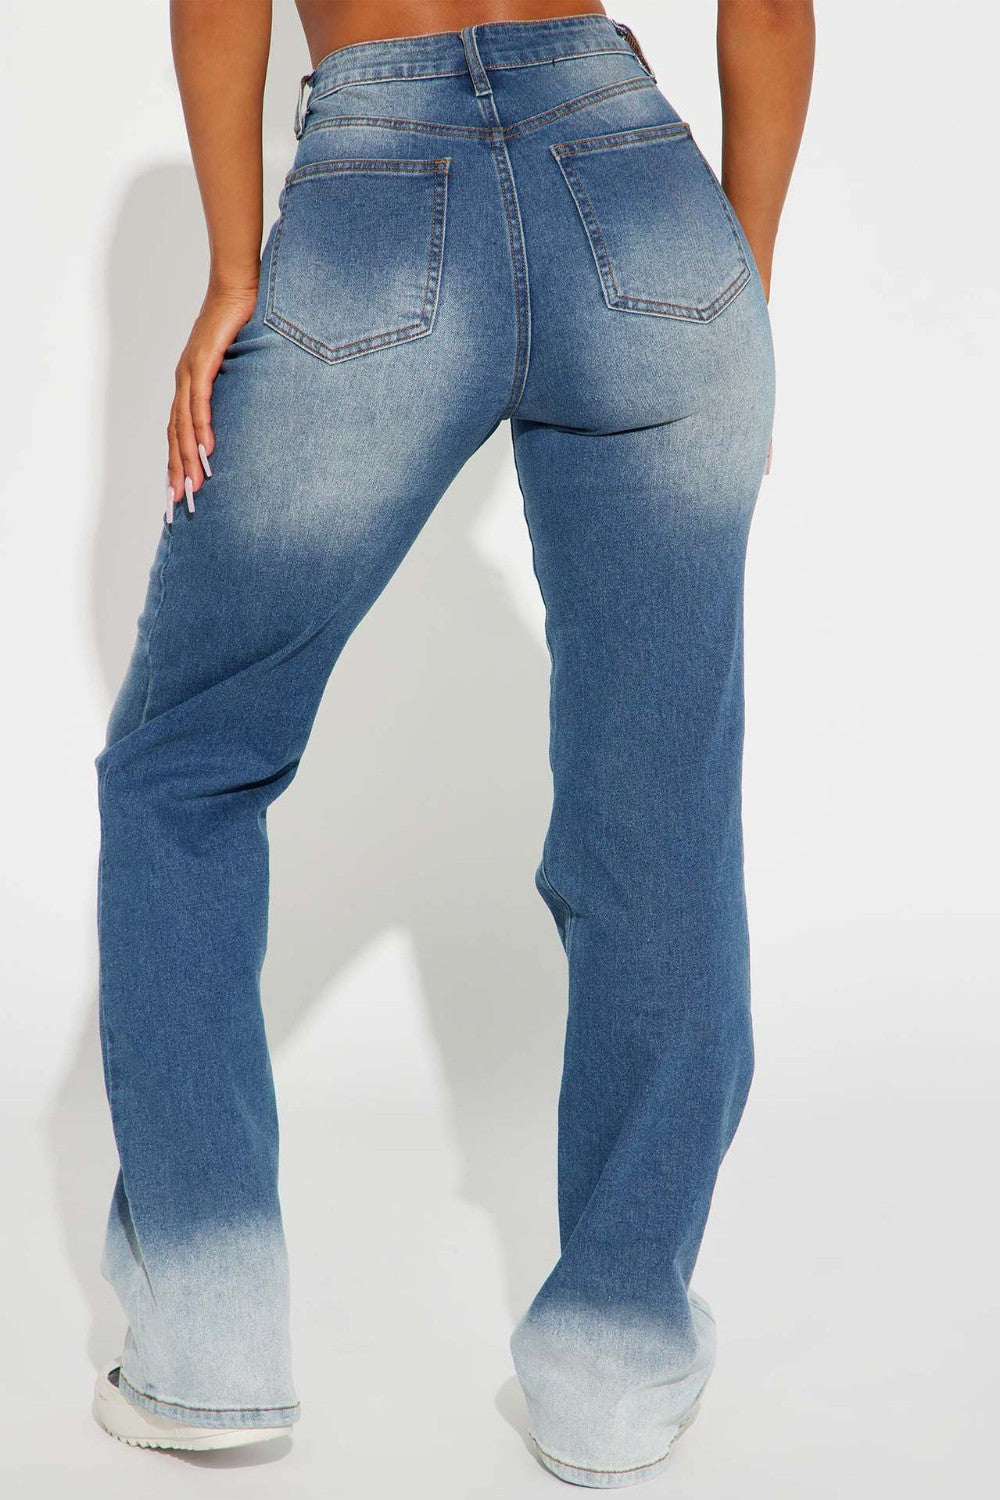 Pocketed Buttoned Straight Jeans Bottom wear